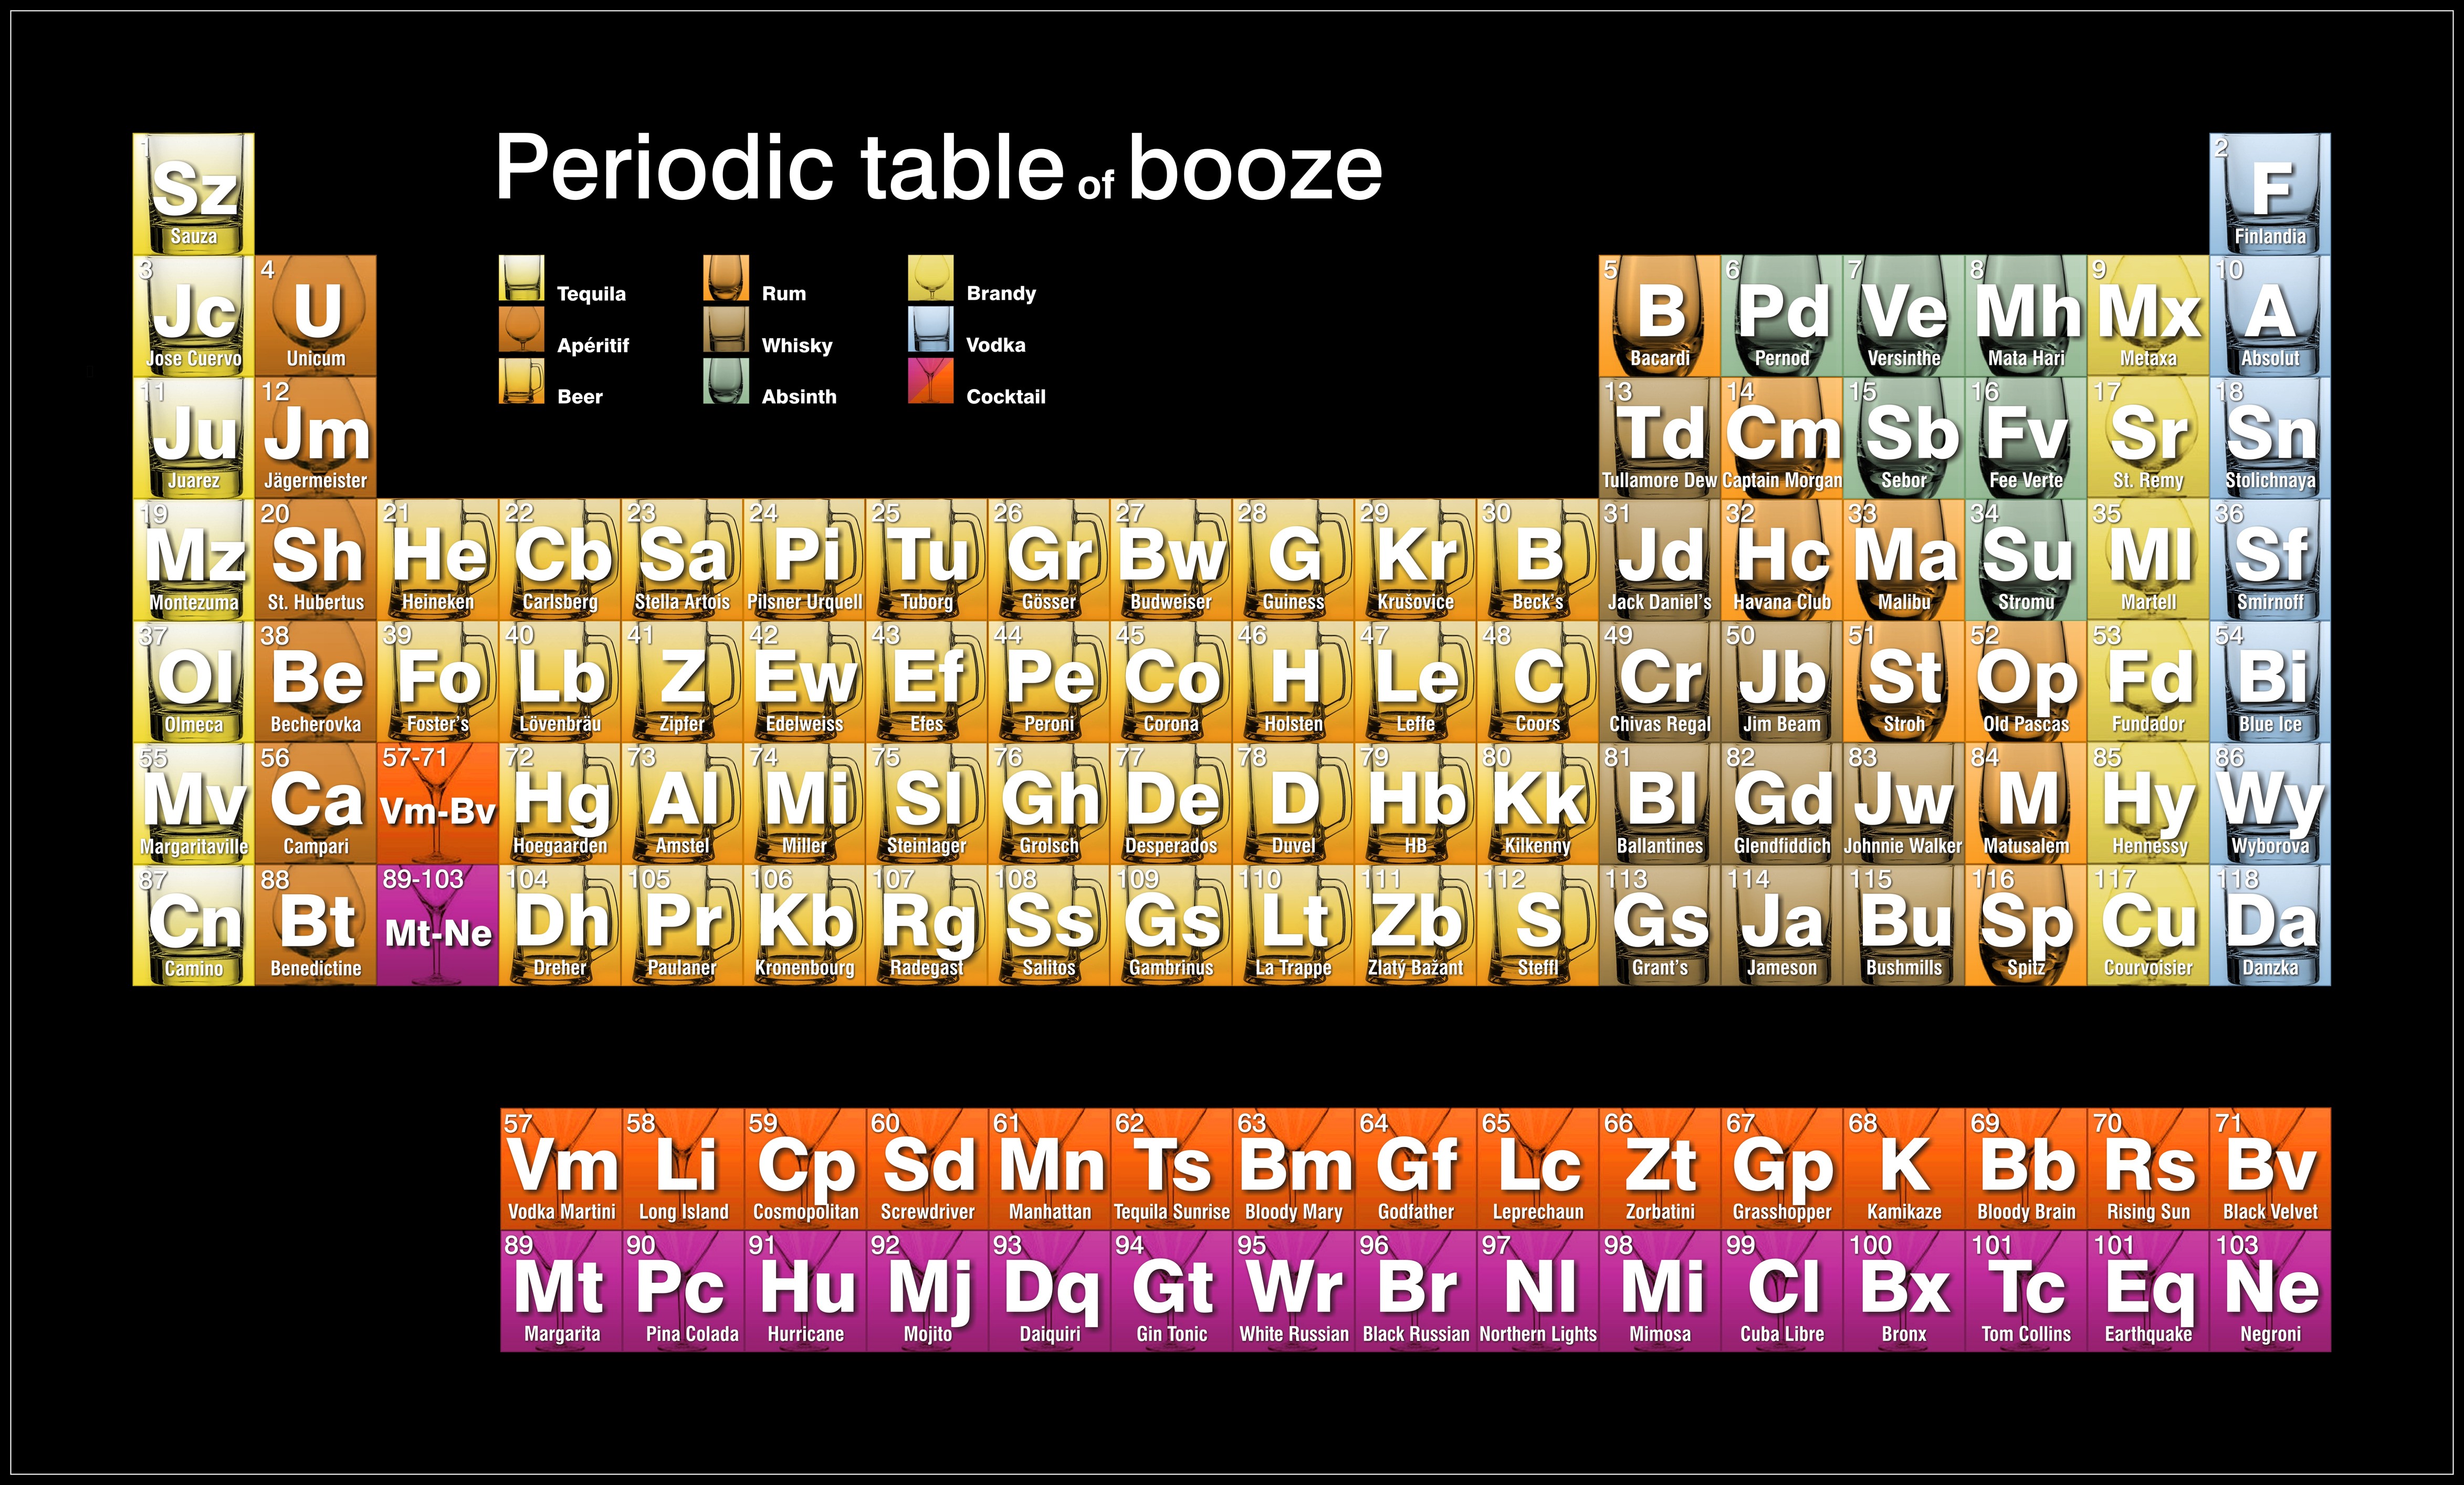 Periodic_table_of_booze_by_tsong.jpg